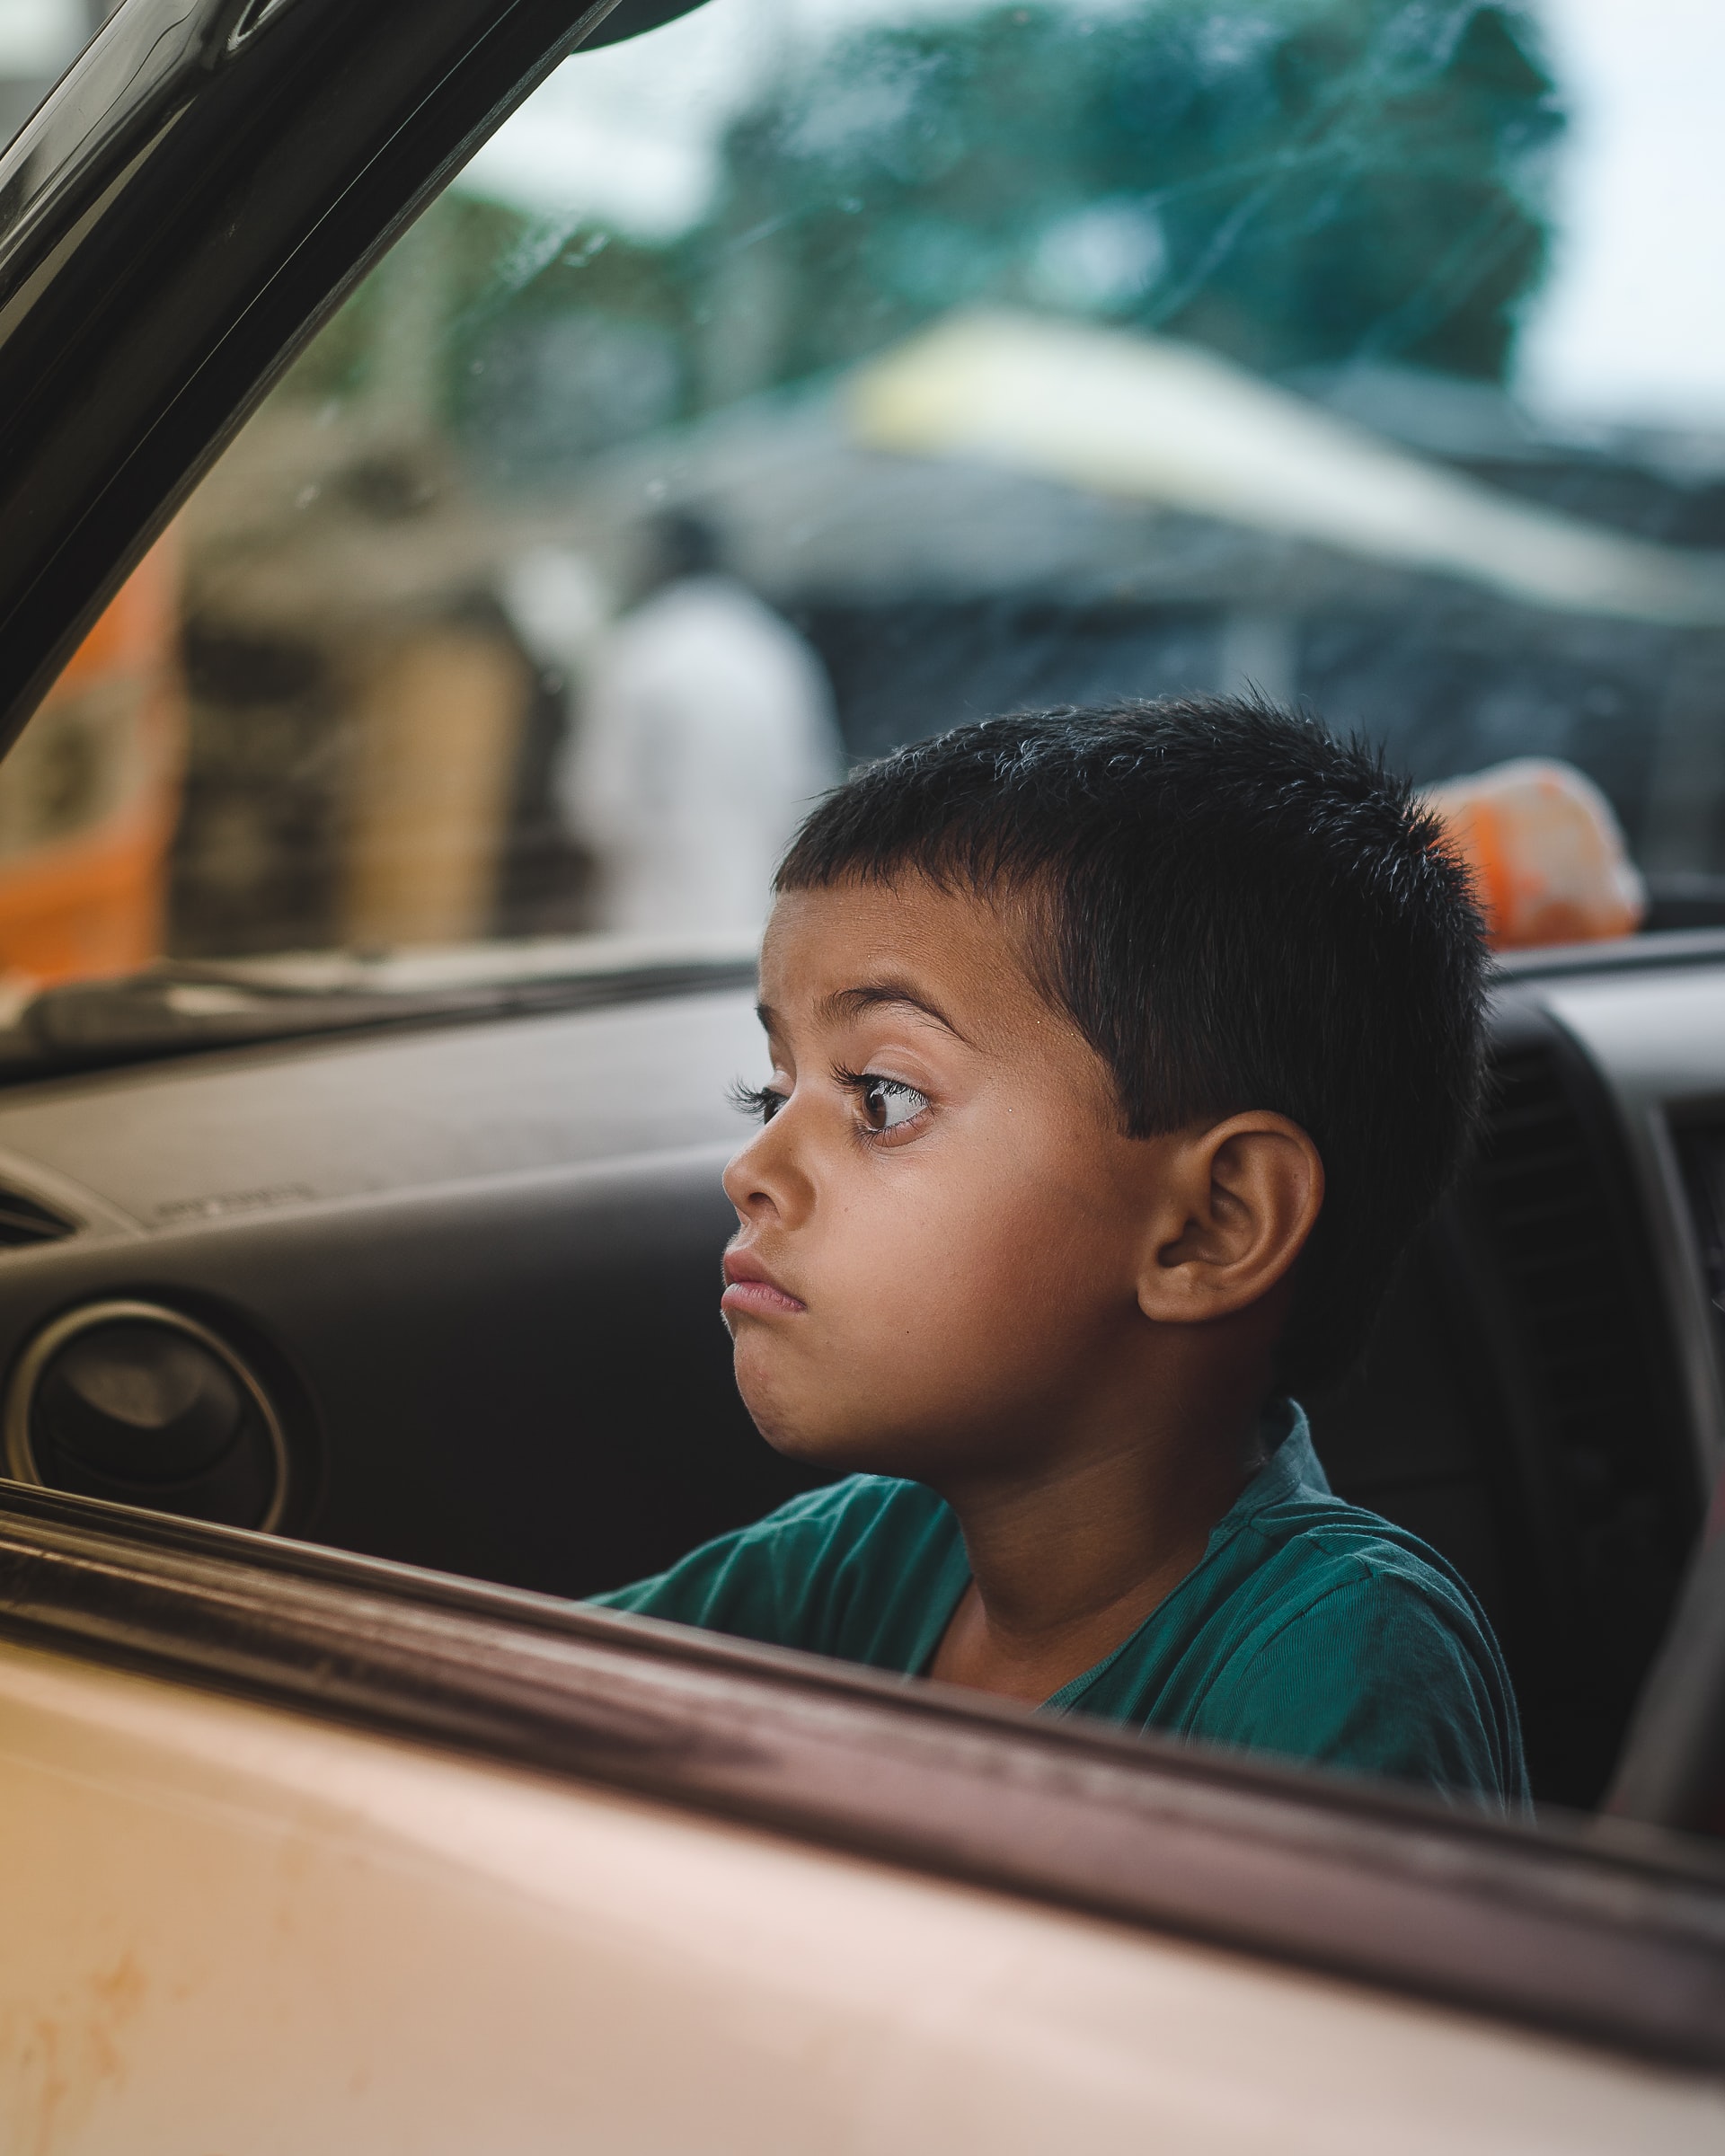 child safety while driving, child in car